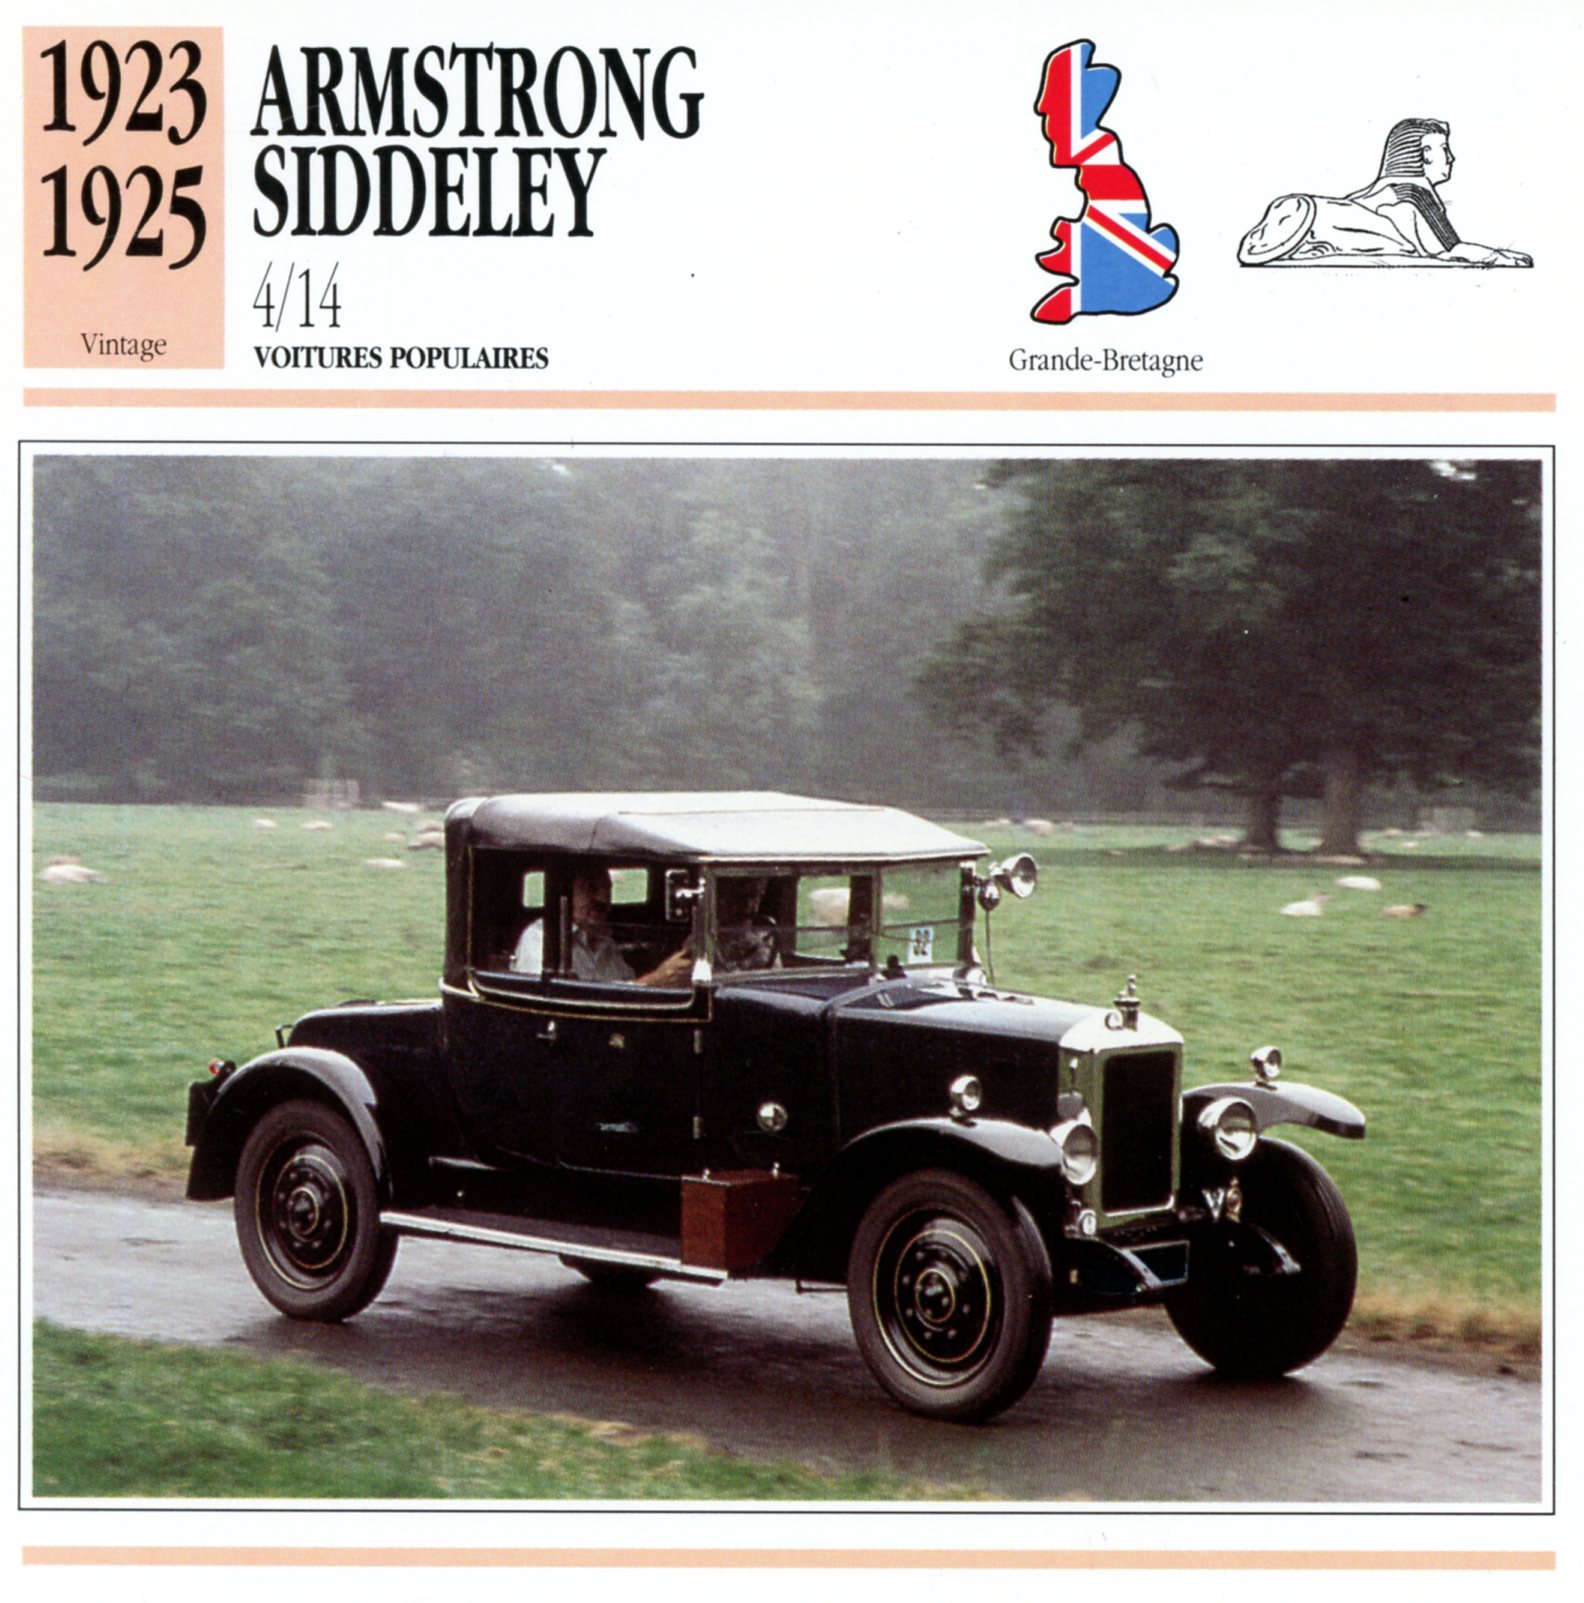 FICHE-AUTO-ARMSTRONG-SIDDELEY-LEMASTERBROCKERS-CARS-CARD